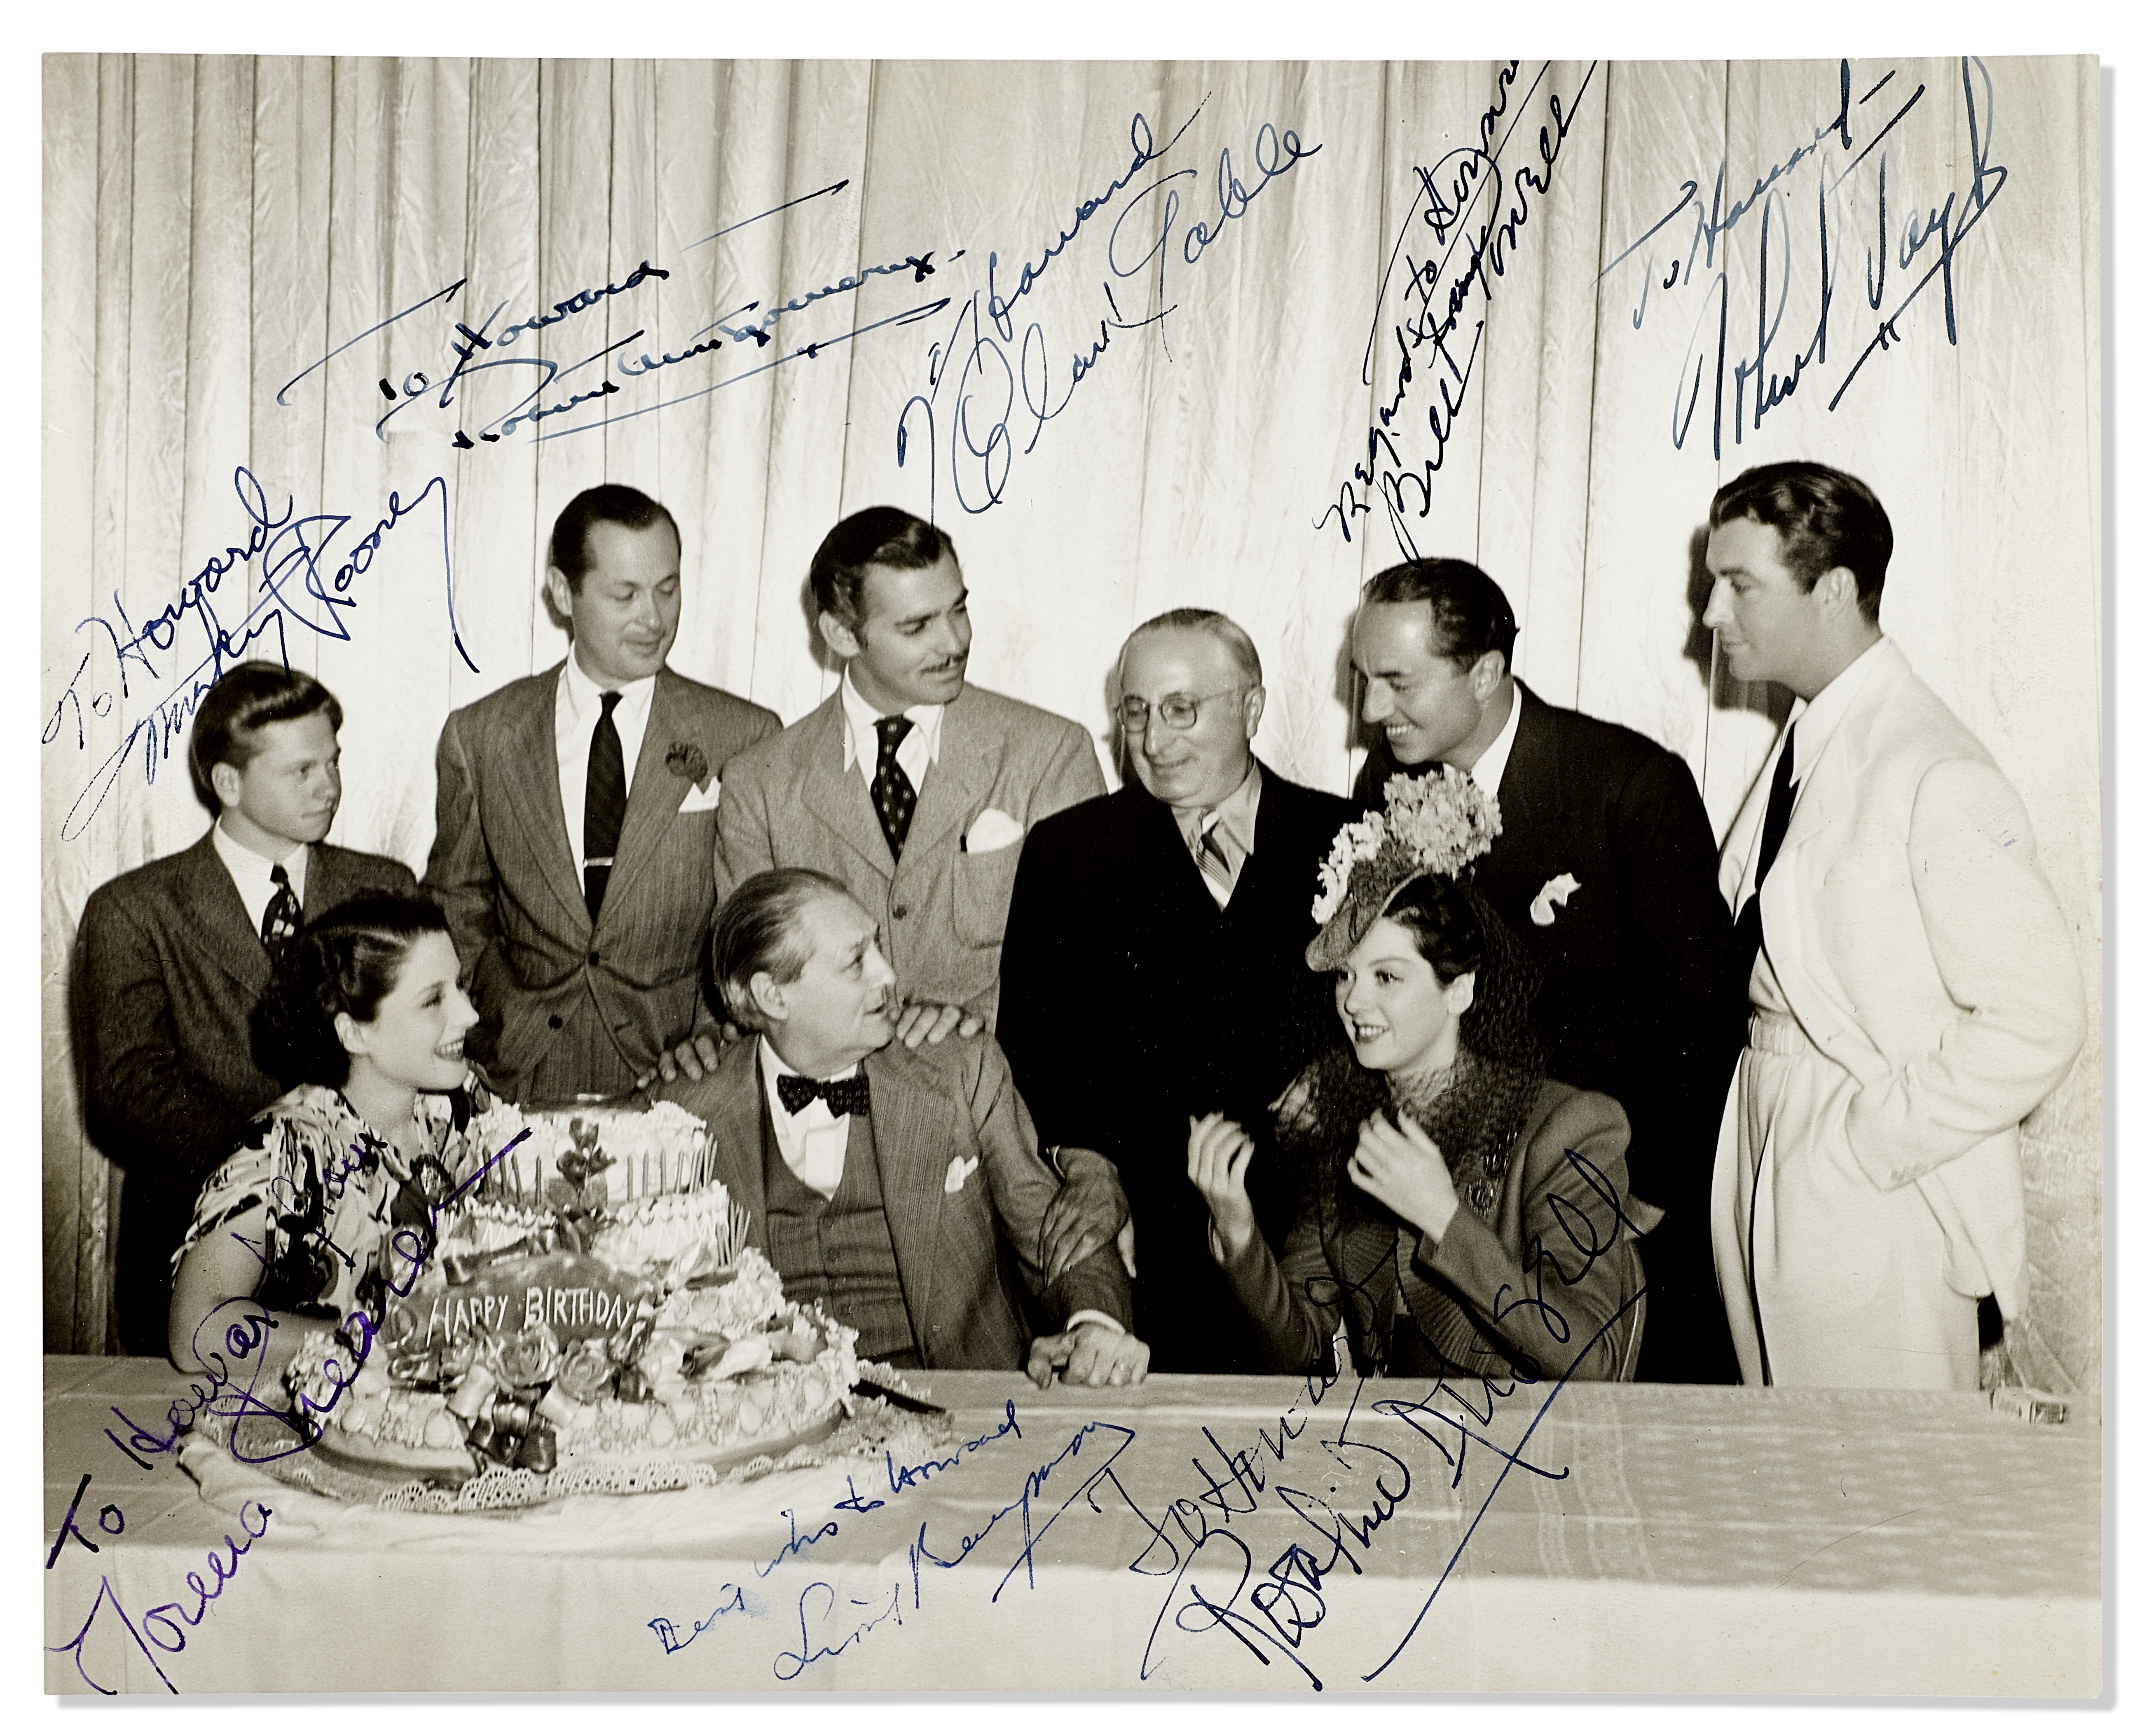 A signed photograph of MGM's top stars of 1939 including Clark Gable, Norma Shearer, and others